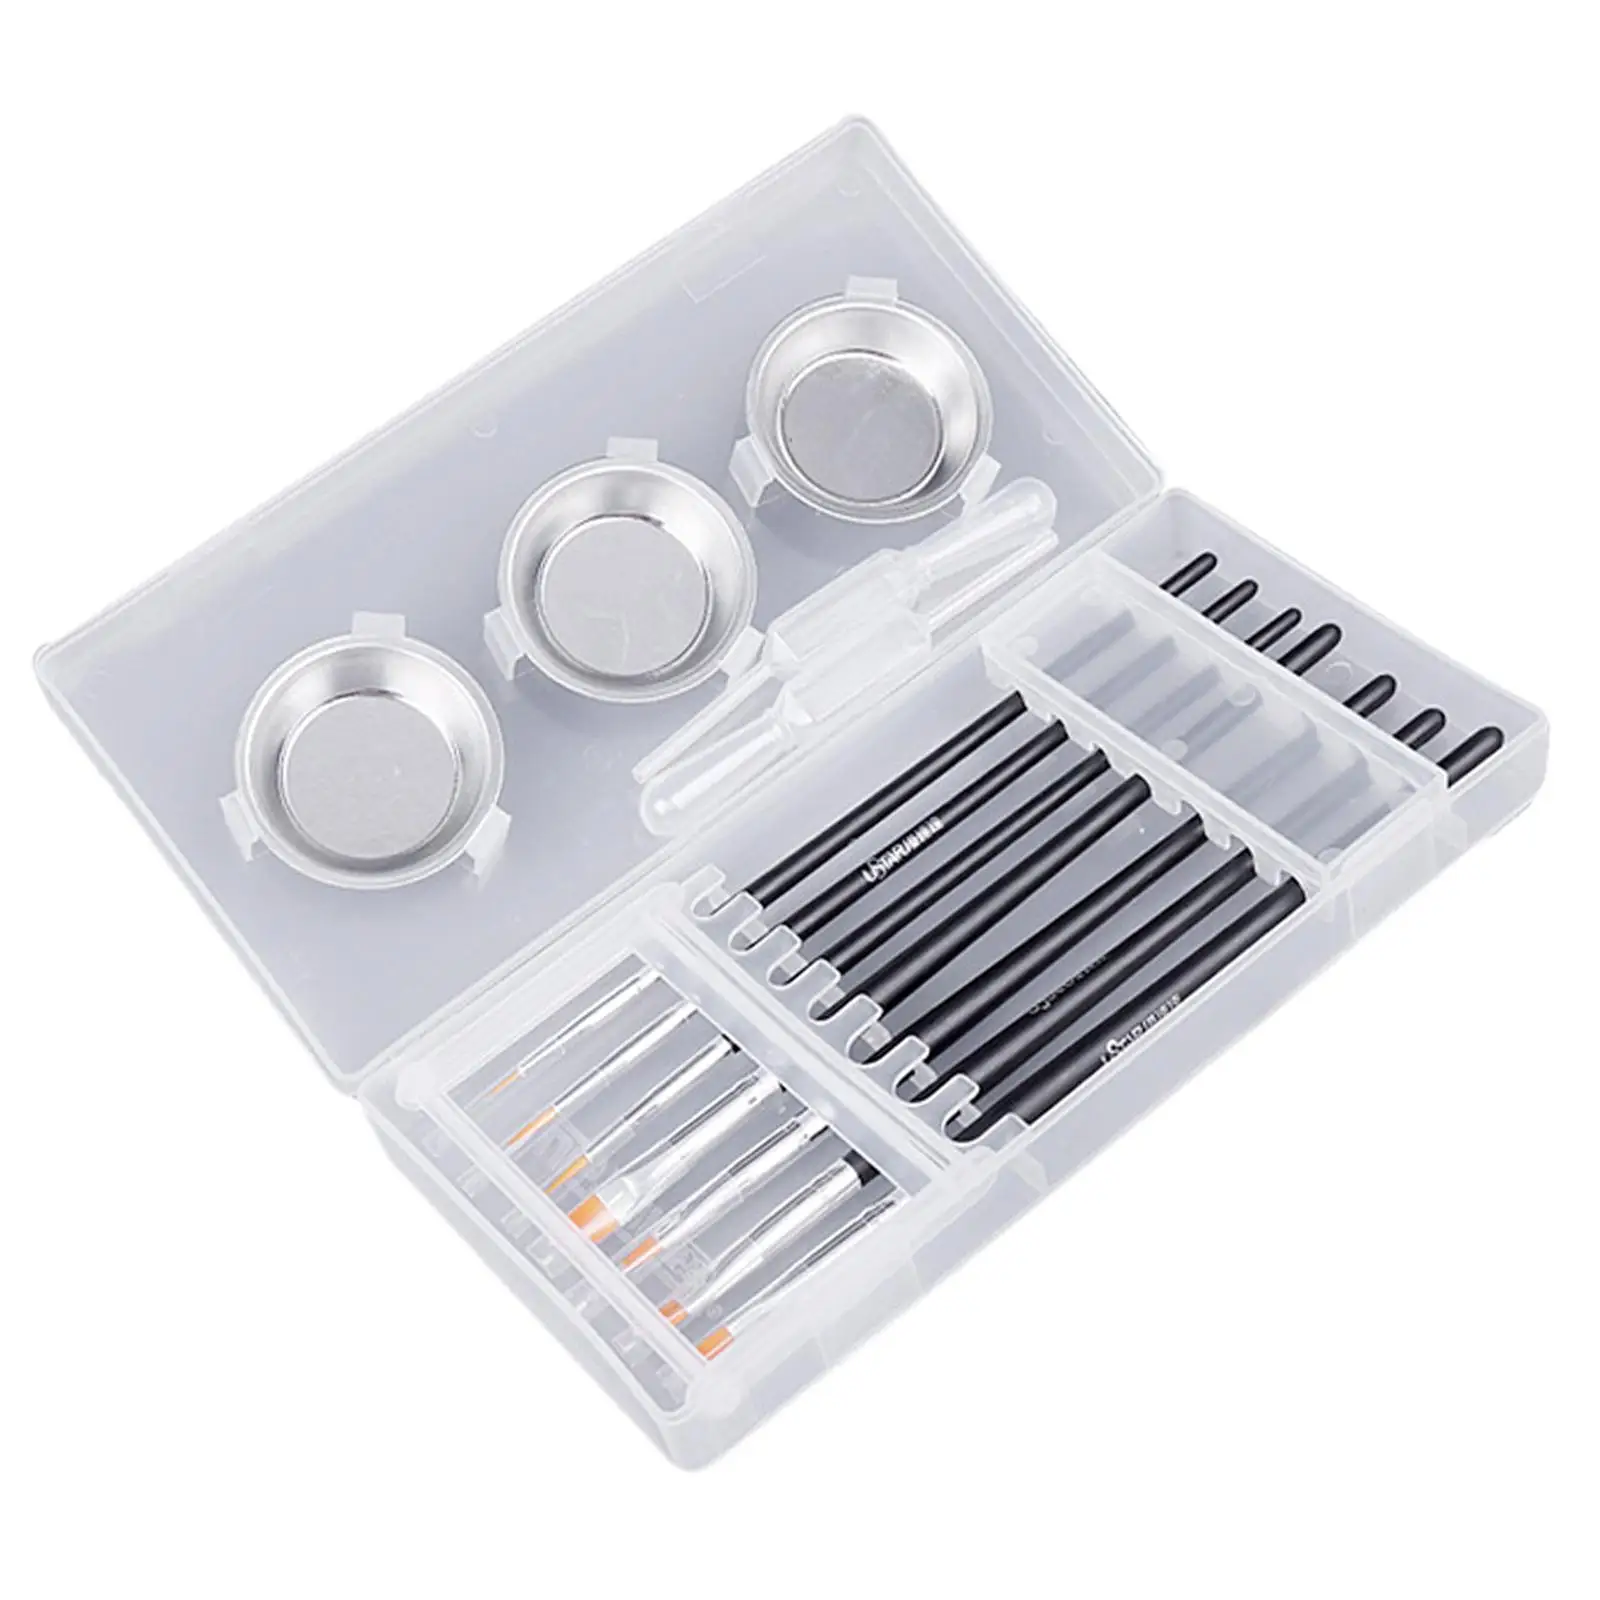 Painting Brush Palette Set Washable Model Coating Tool for DIY Crafts Model Painting Kids or Adults Oil Watercolor Hobby Paint